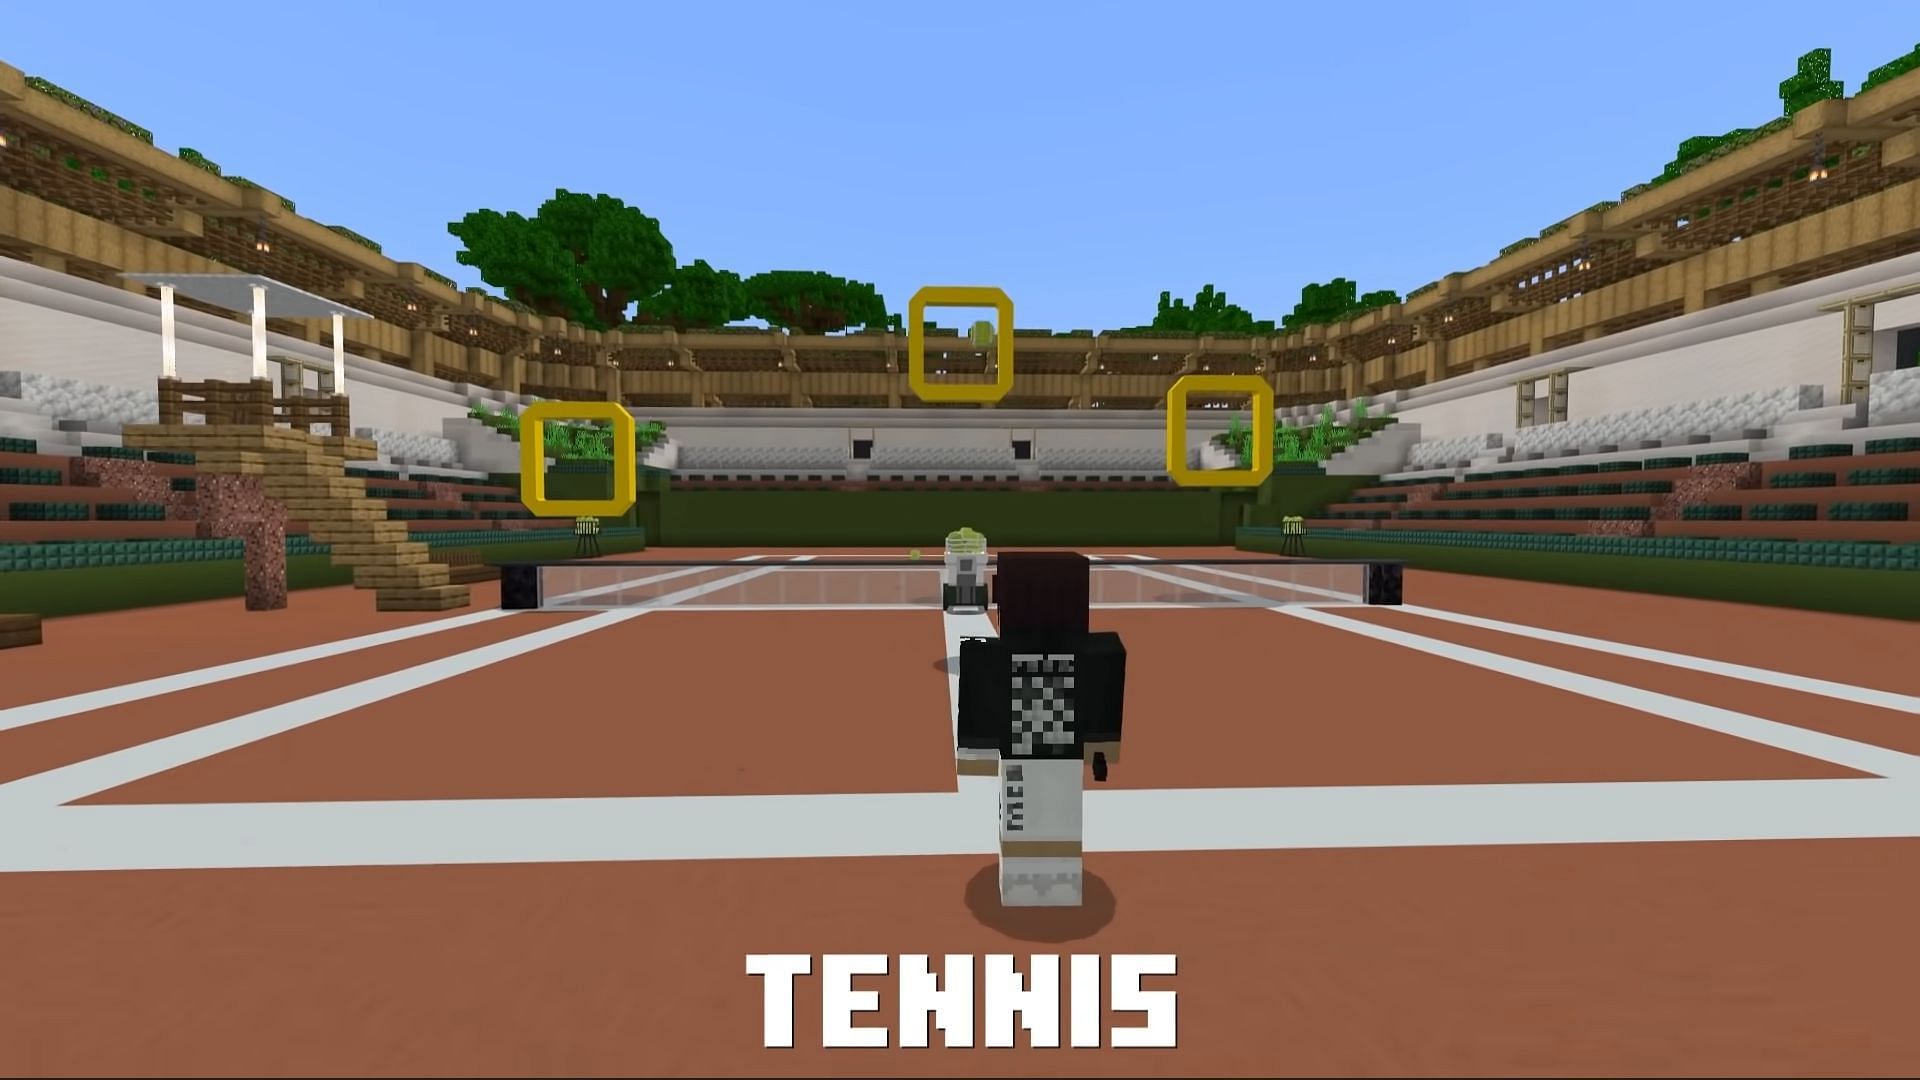 Tennis court in the map (Image via Mojang YouTube)